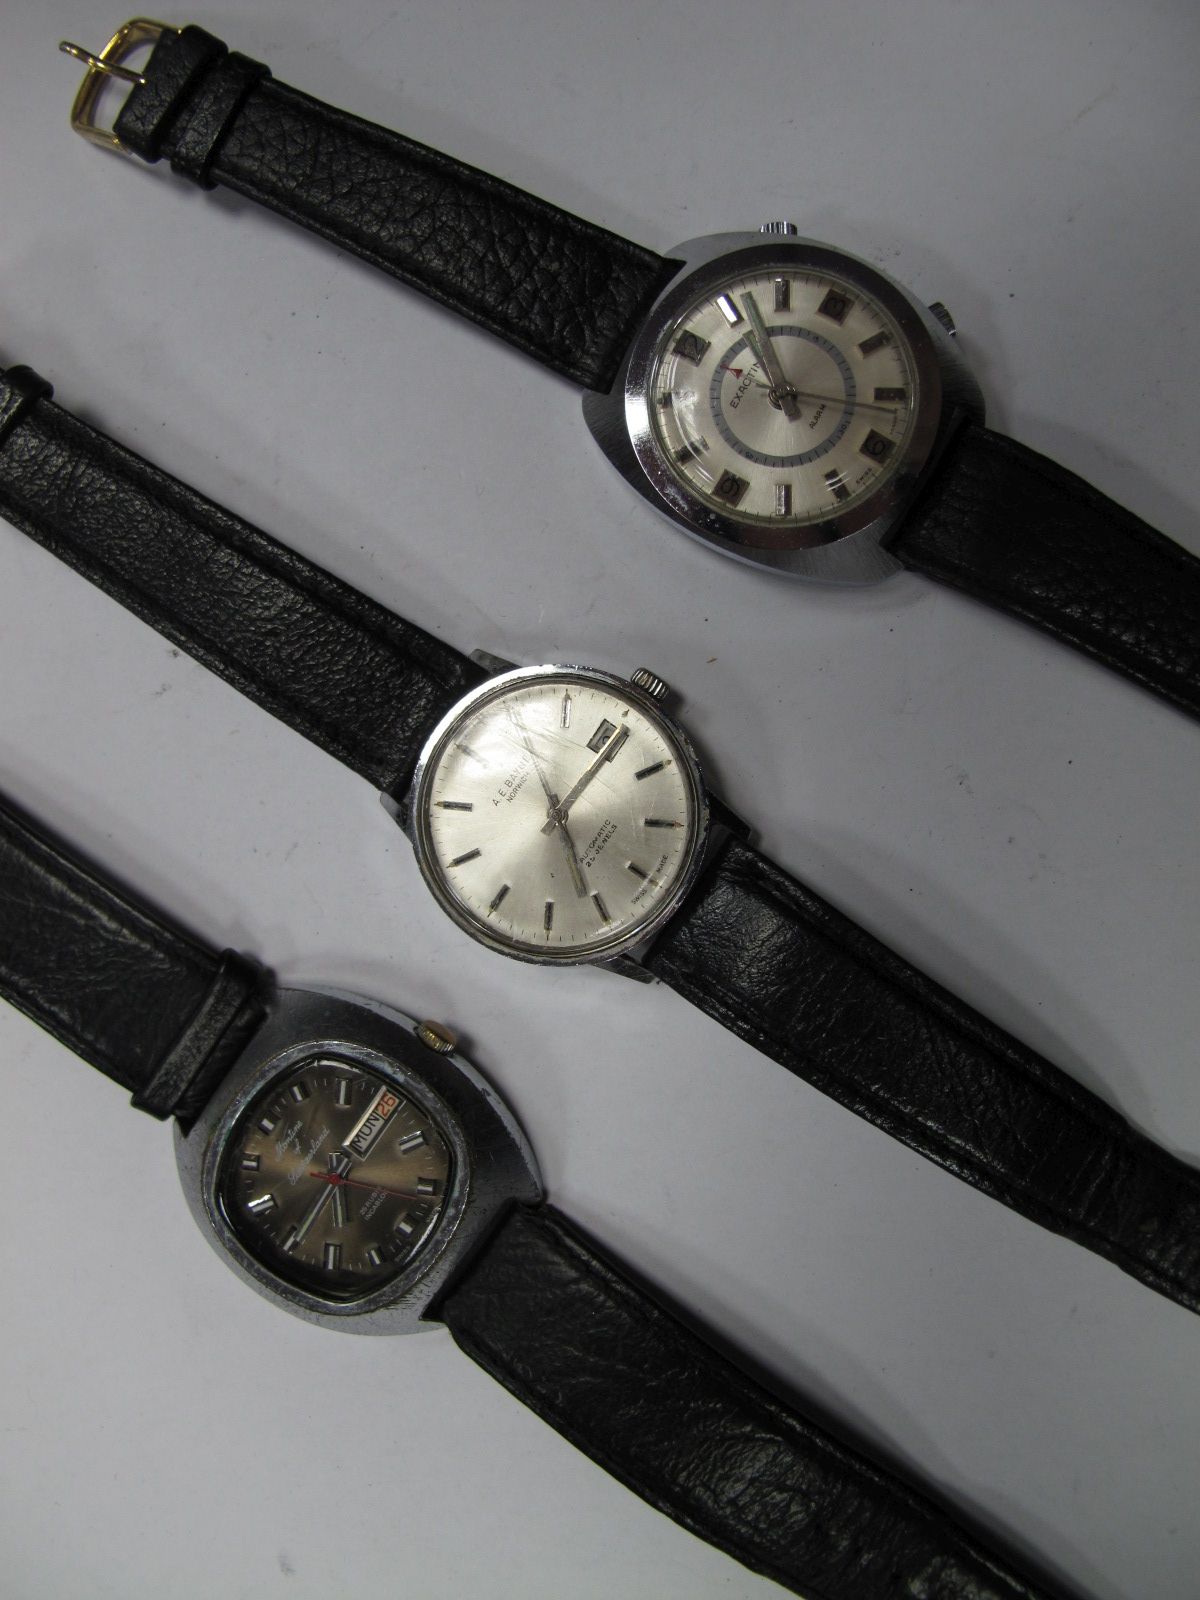 Exactima Alarm, Montine of Switzerland Automatic and A. E. Bayne Norwich Gent's Wristwatches. (3)